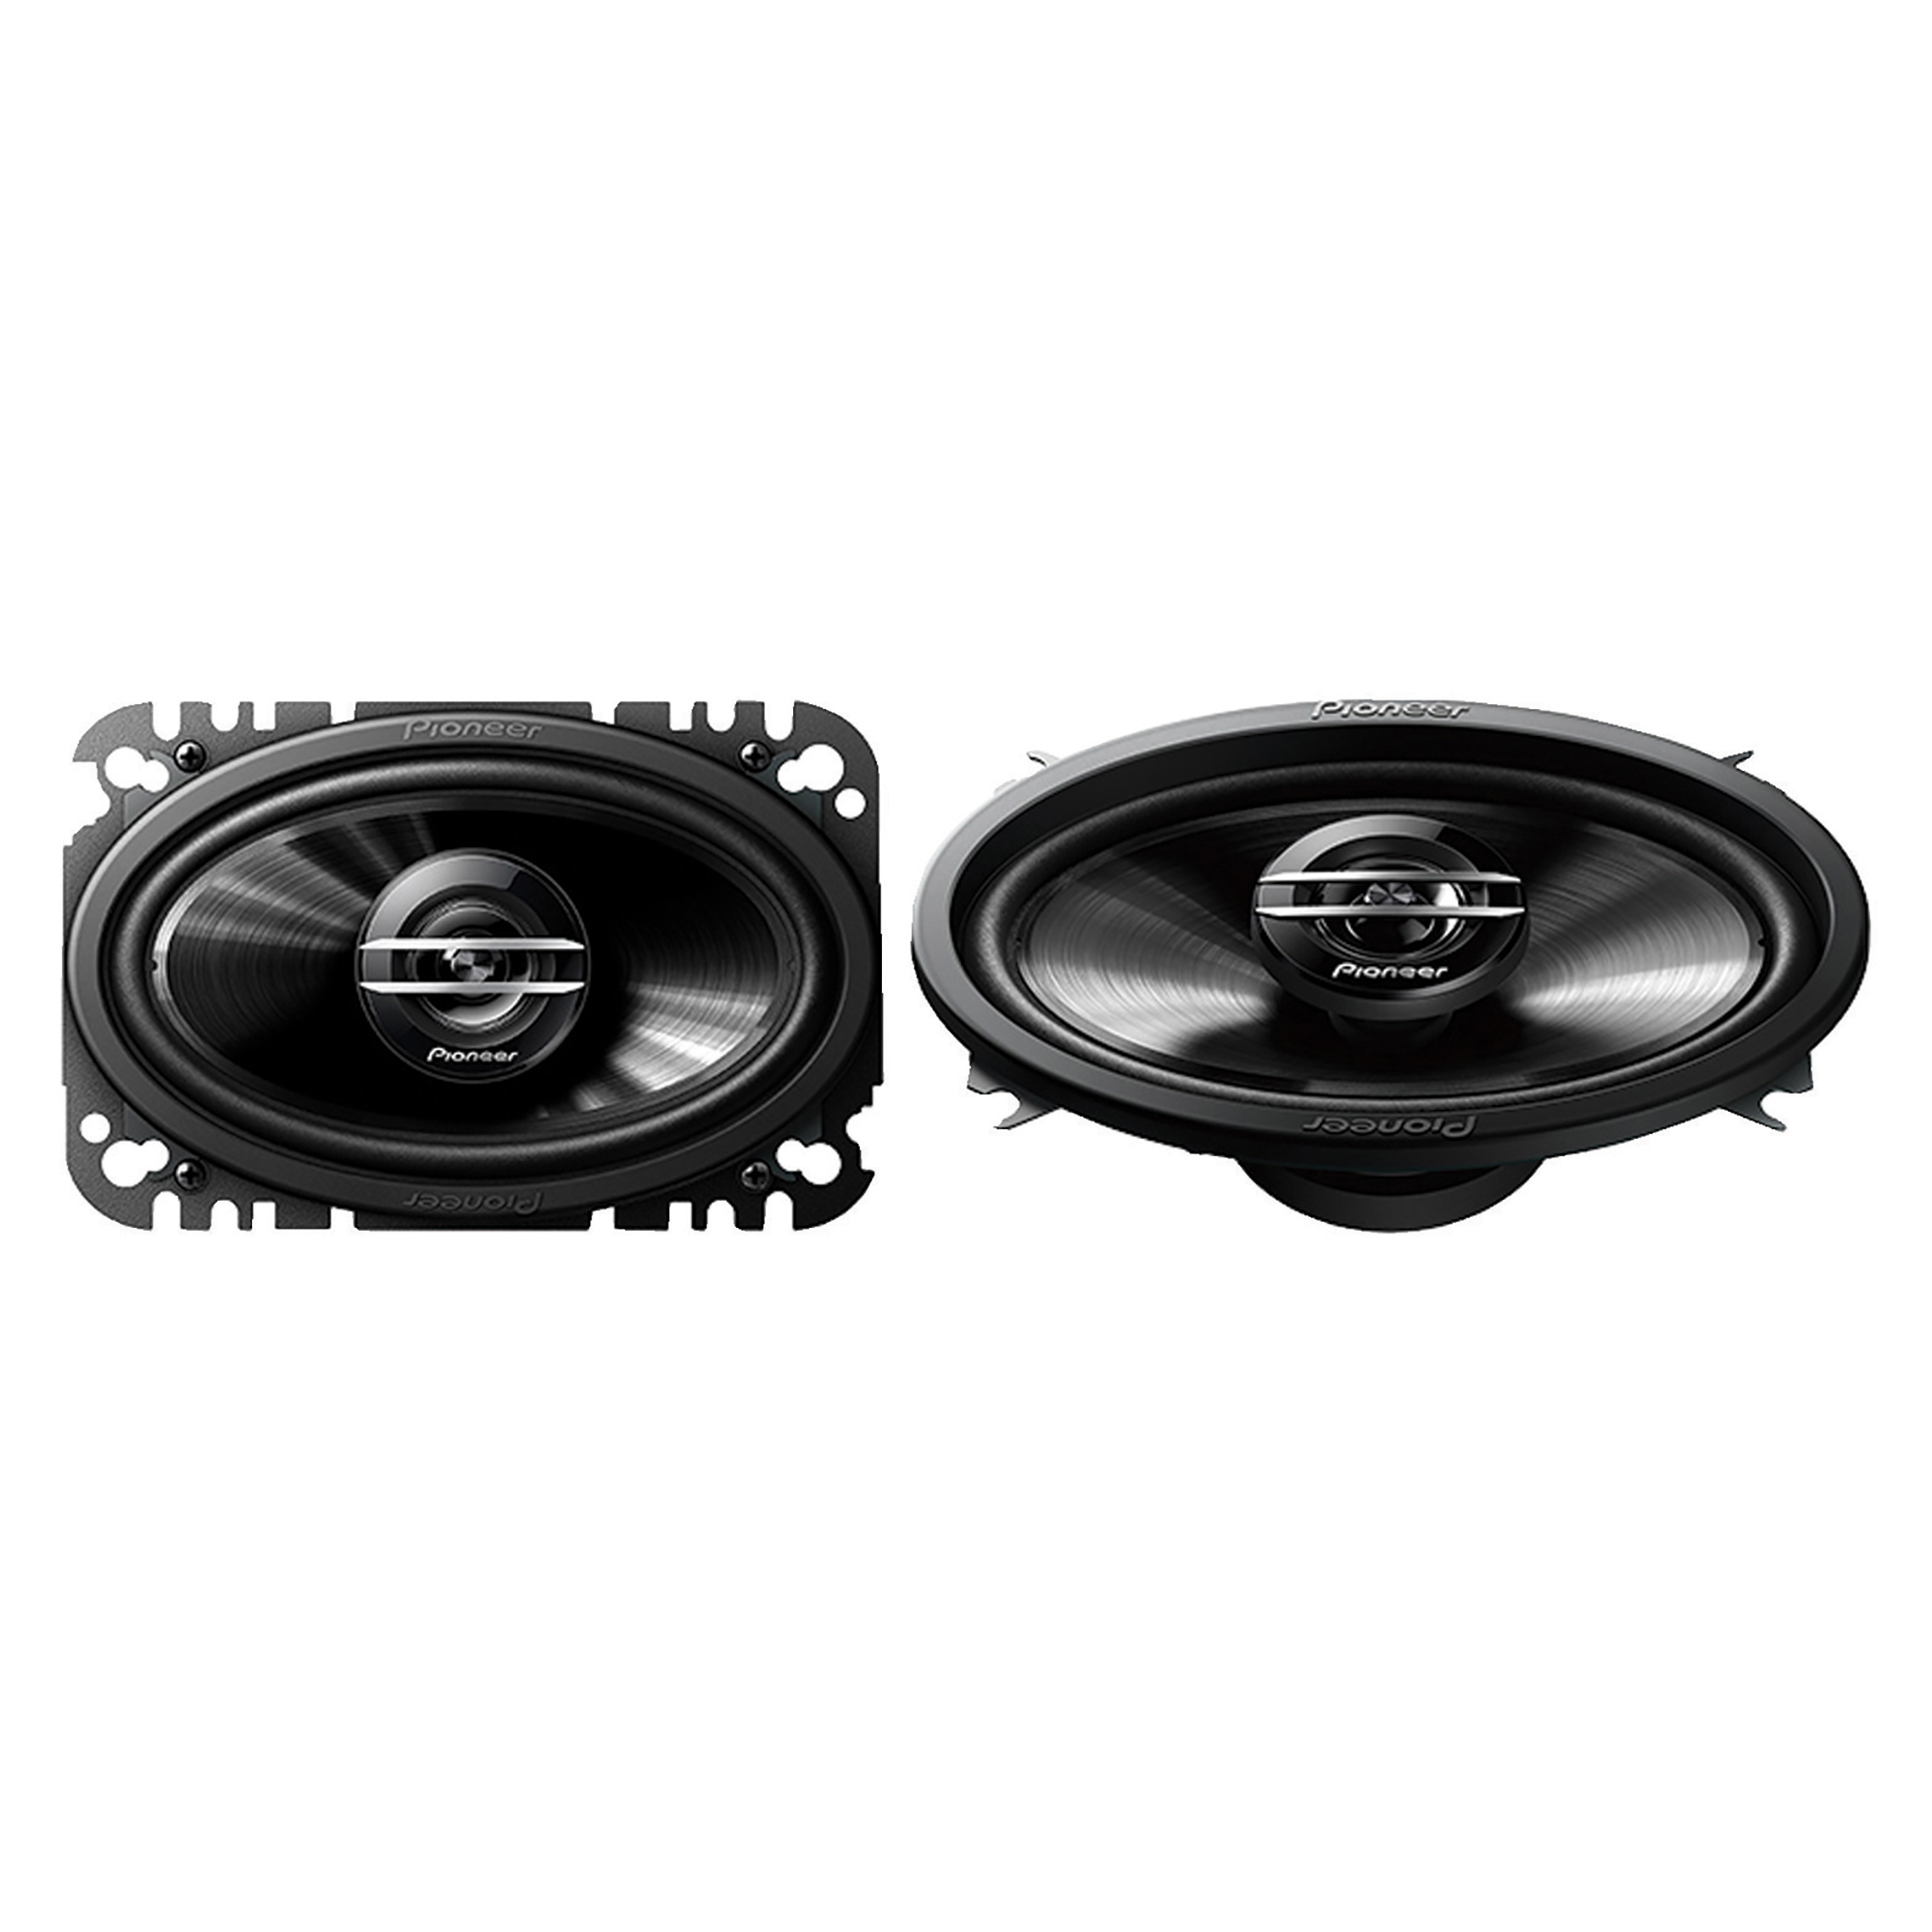 Pioneer G-Series, 4Inch x 6Inch 2-Way Coaxial Speakers, 2-Pack, Model TS-G4620S